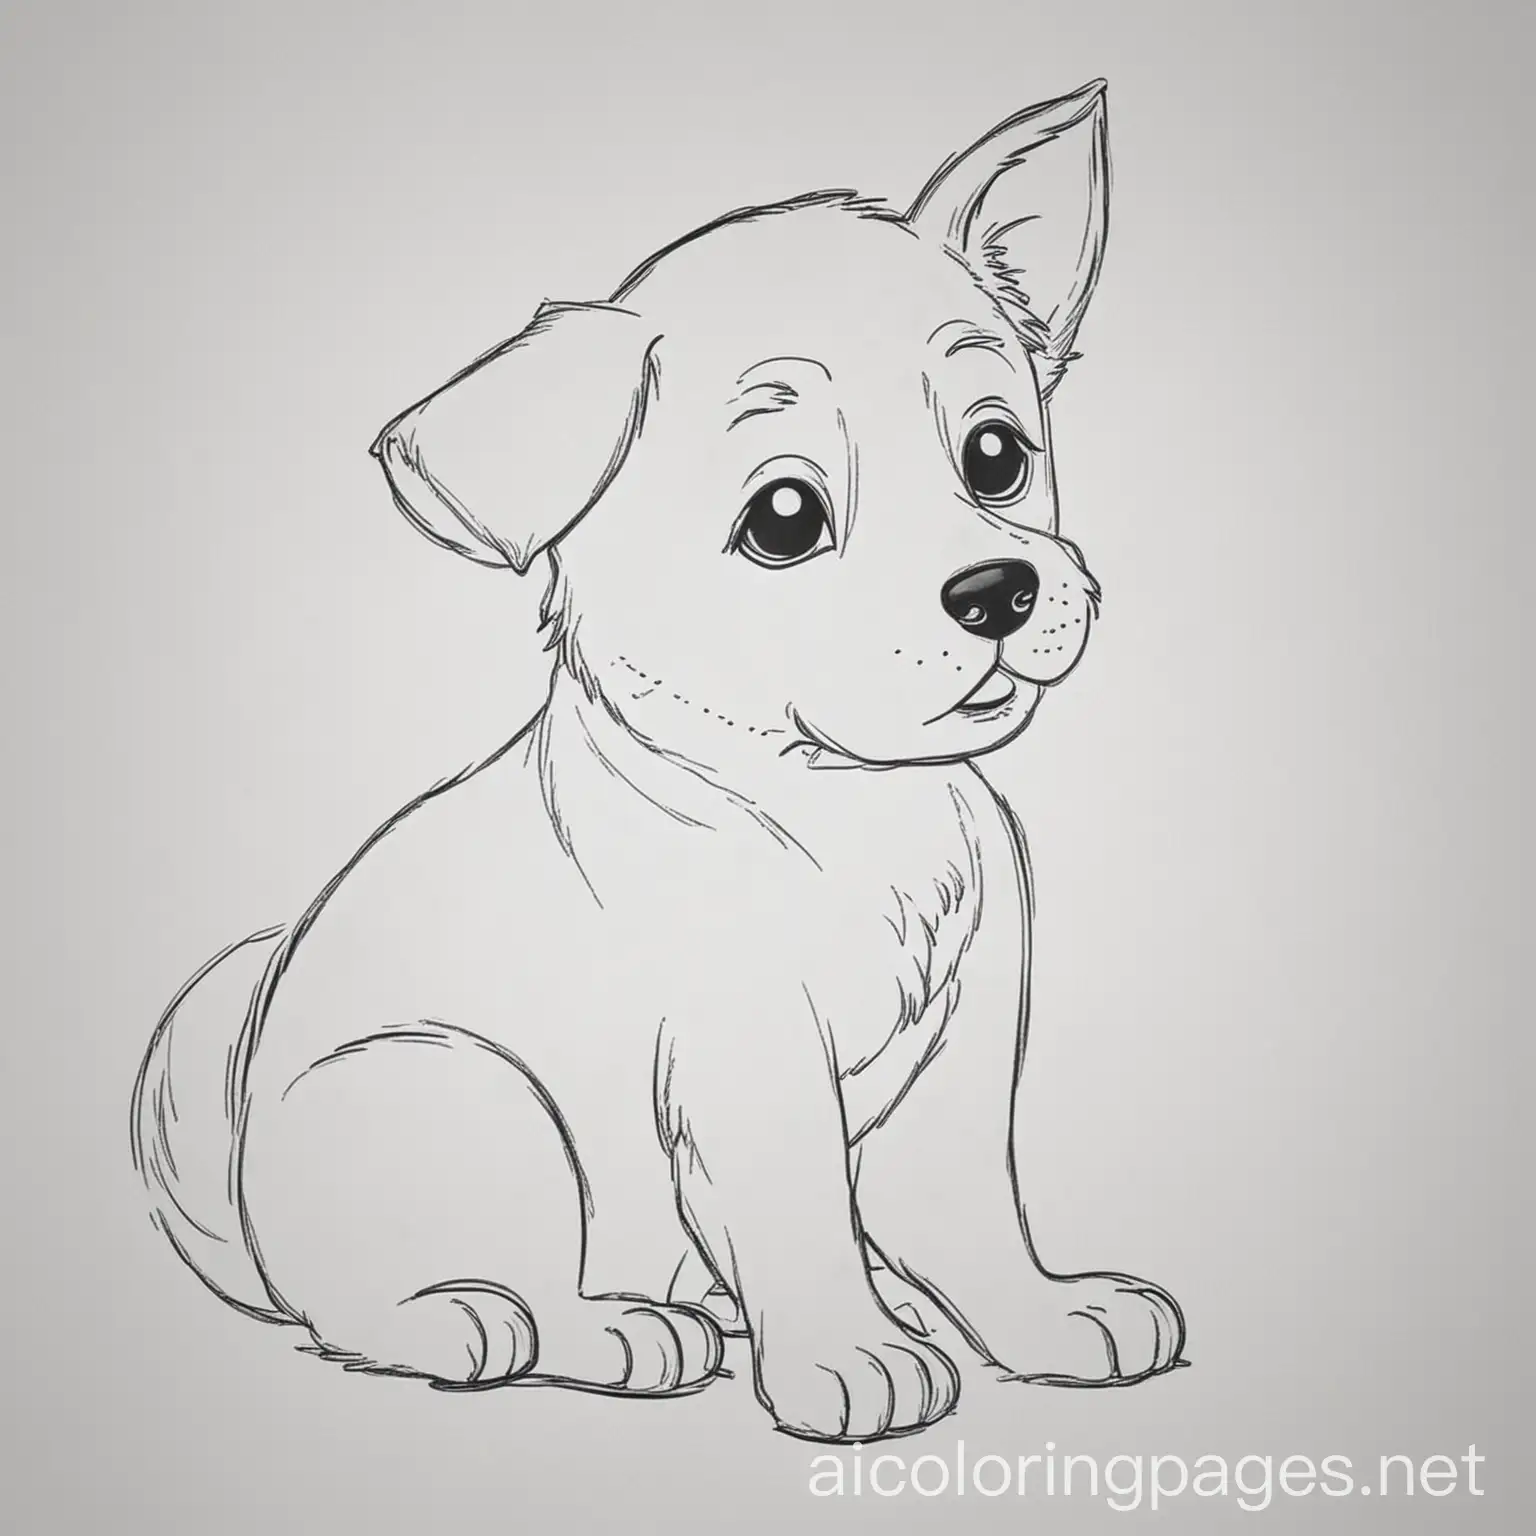 Simple-Dog-Coloring-Page-for-Kids-Black-and-White-Line-Art-on-White-Background